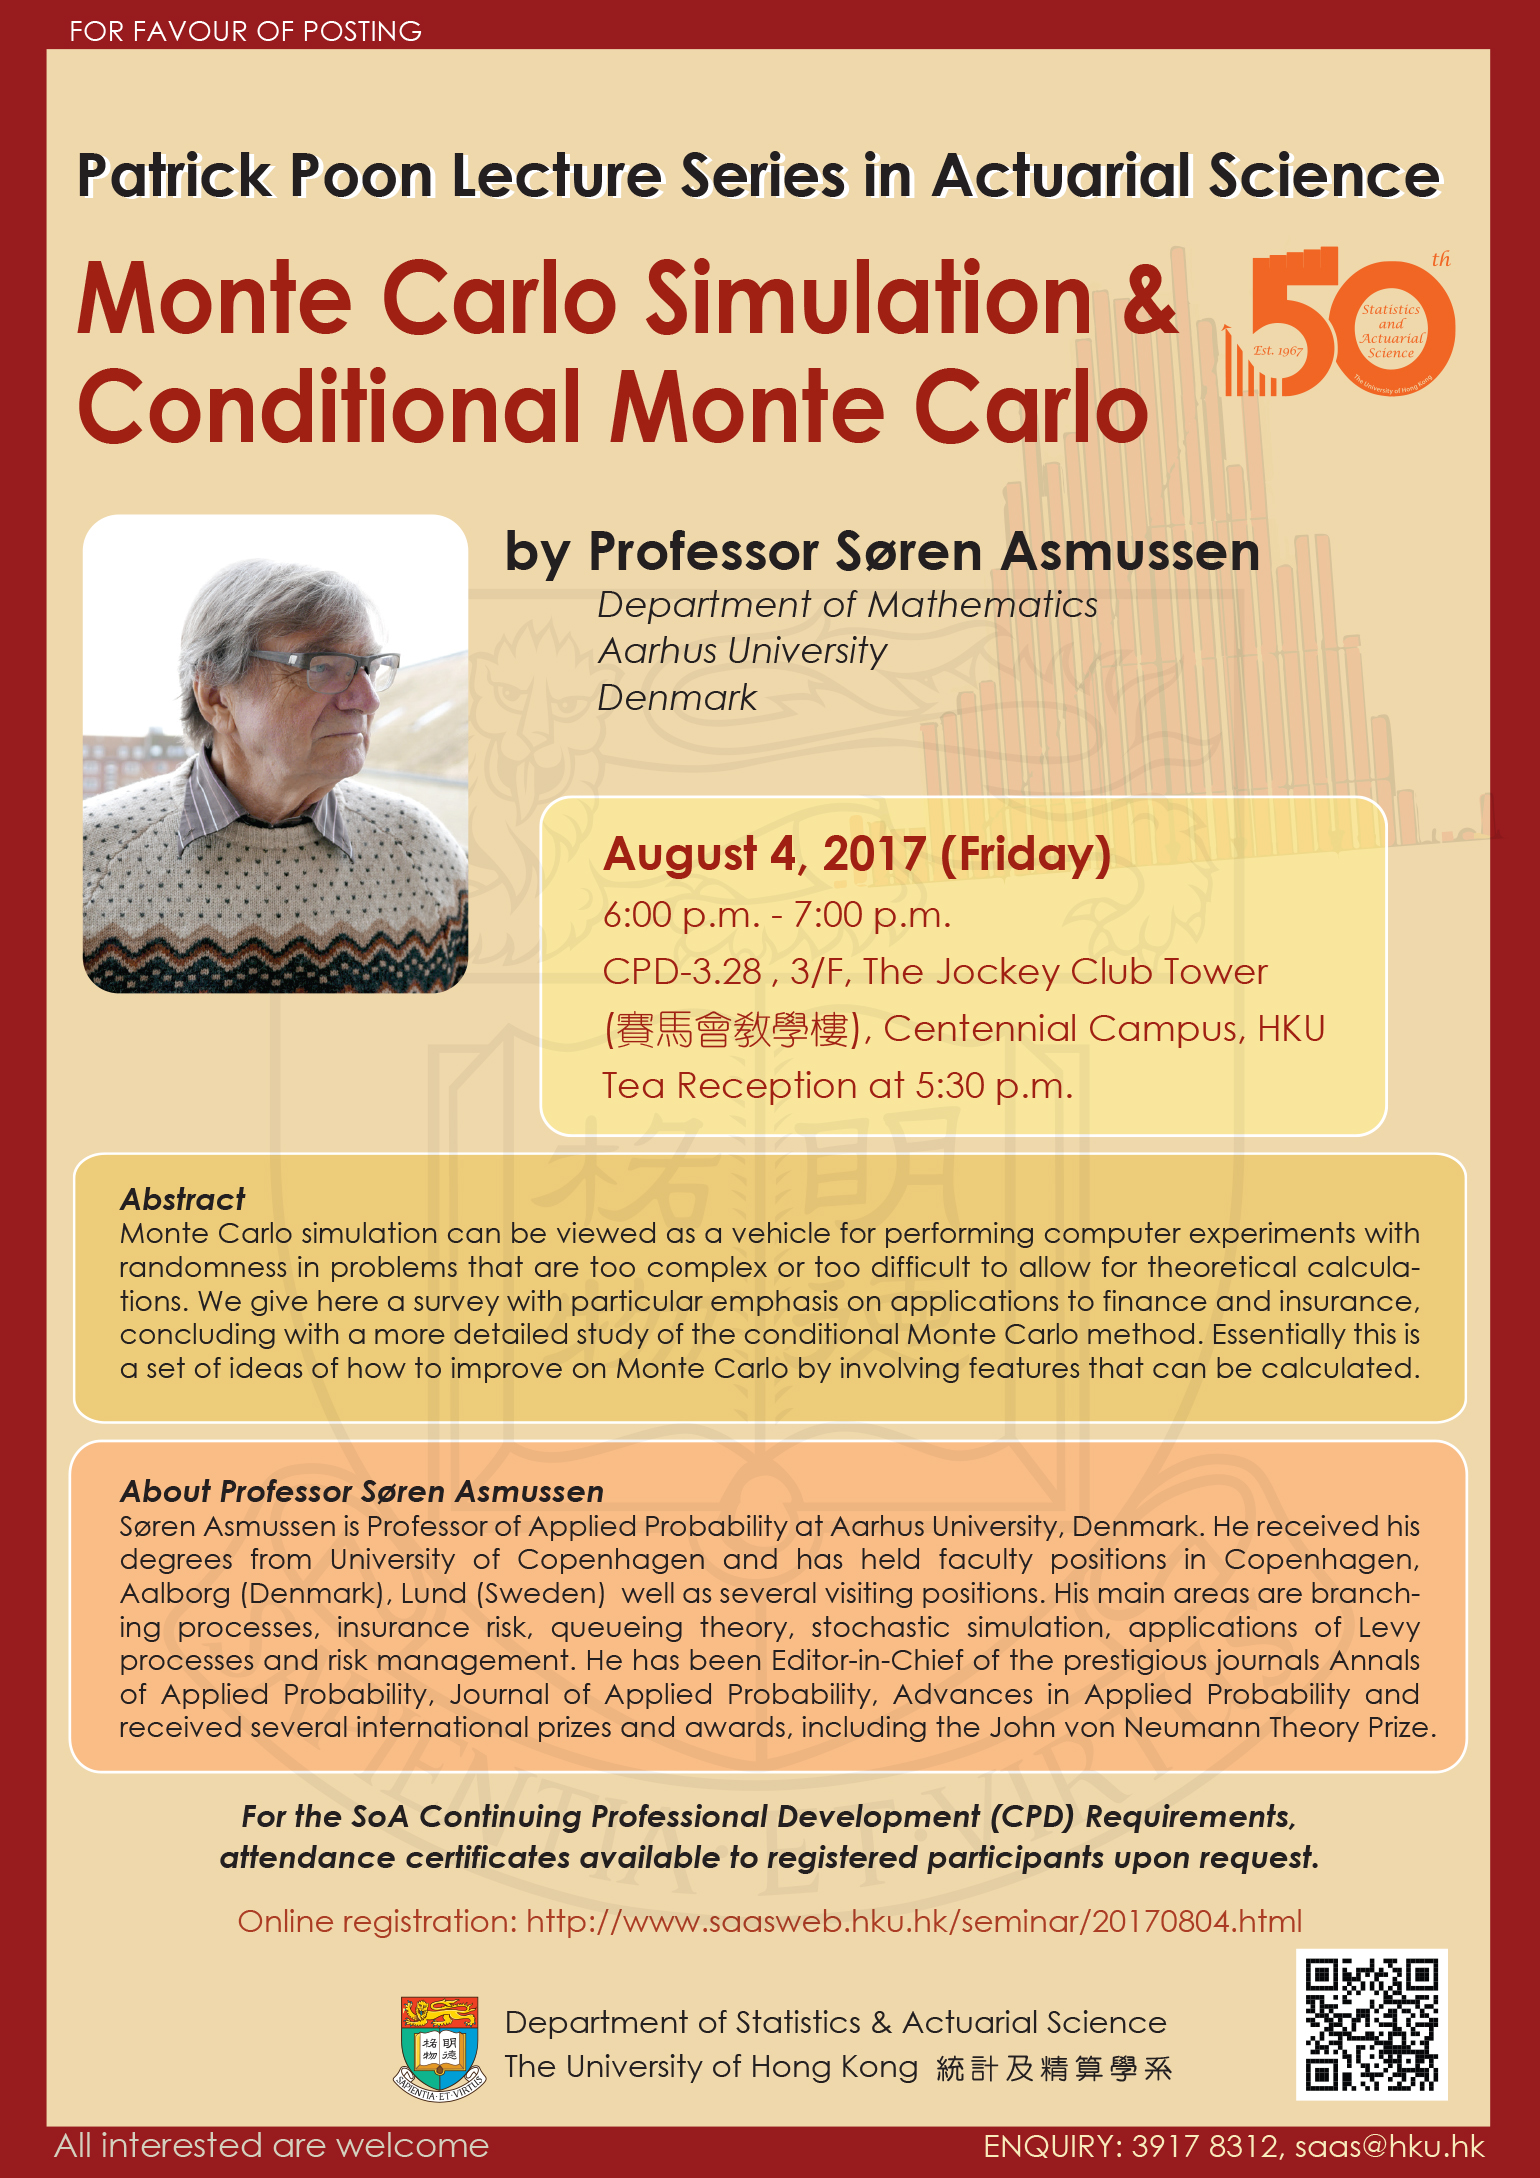 Patrick Poon Lecture Series in Actuarial Science on 'Monte Carlo Simulation & Conditional Monte Carlo' by Professor Søren Asmussen